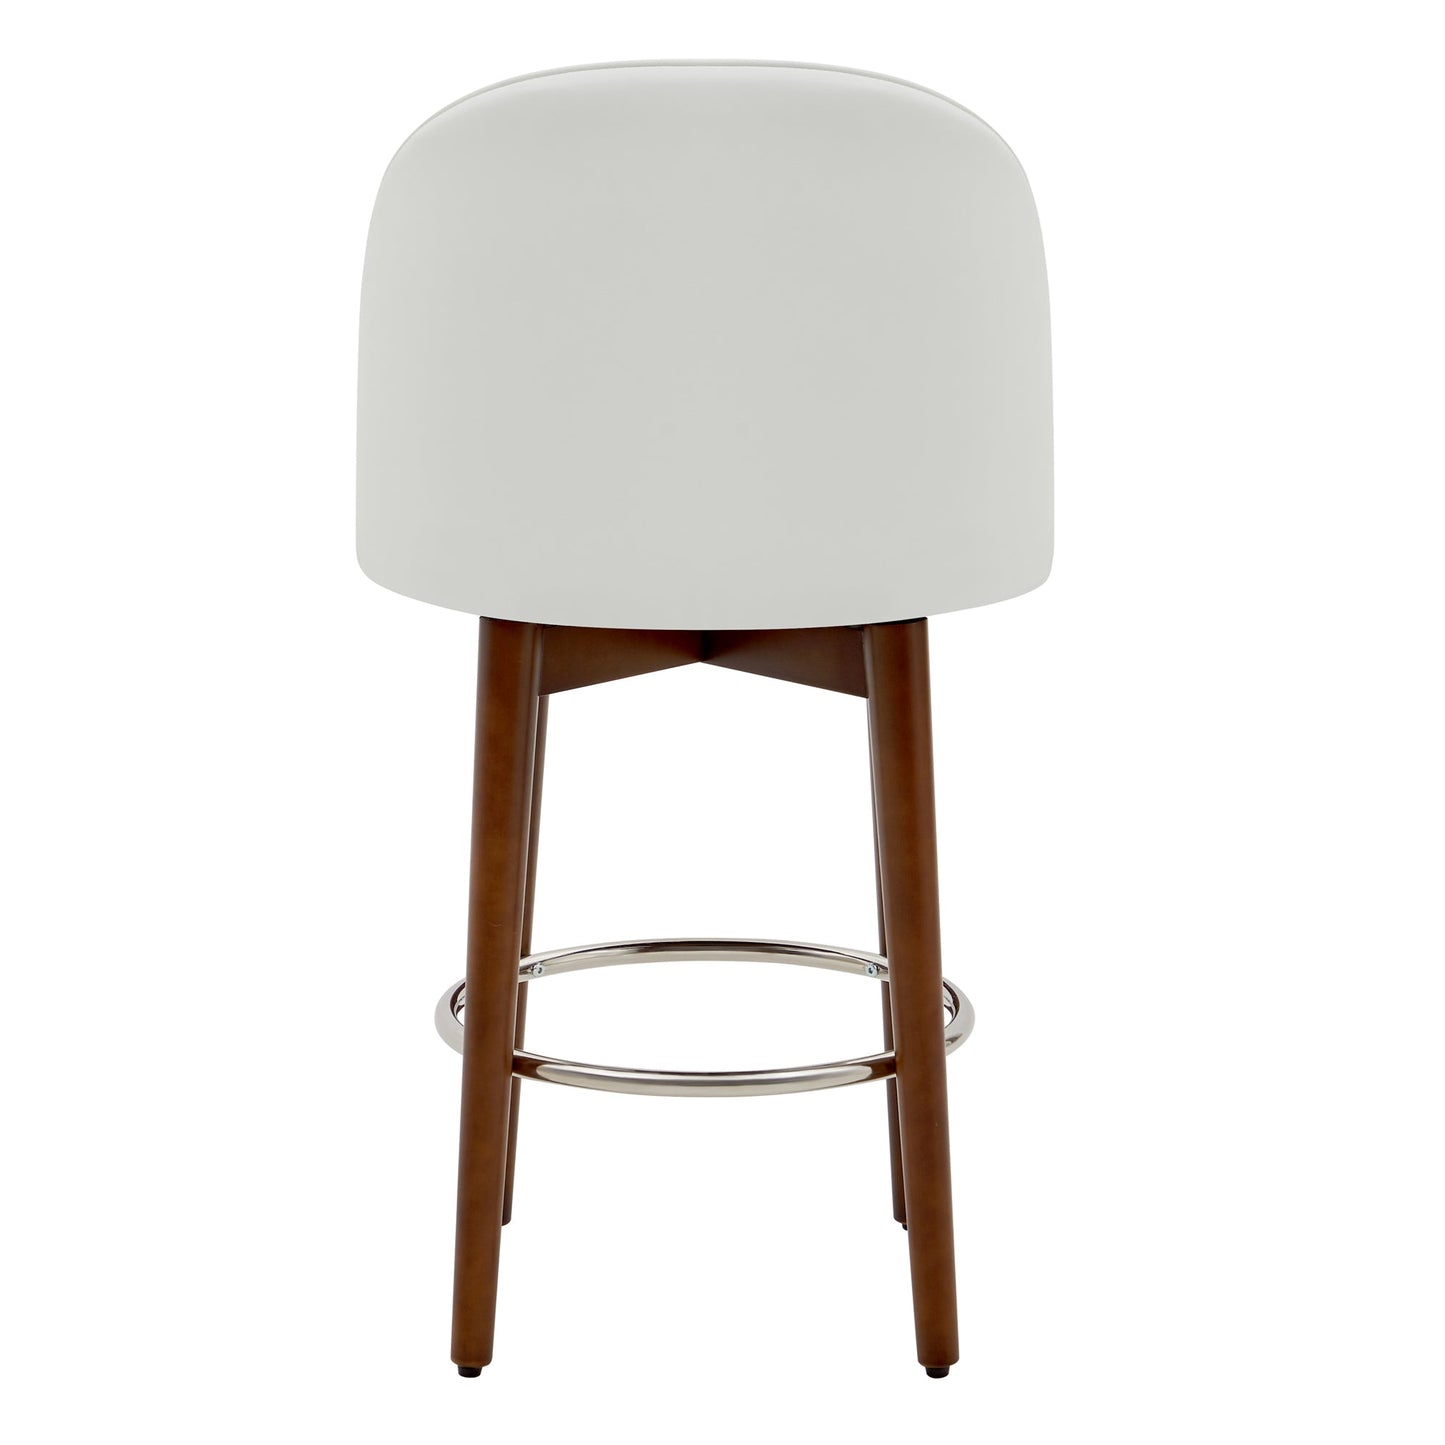 CHITA LIVING-Rosa Swivel Counter Stool (Set of 2)-Counter Stools-Faux Leather-White-